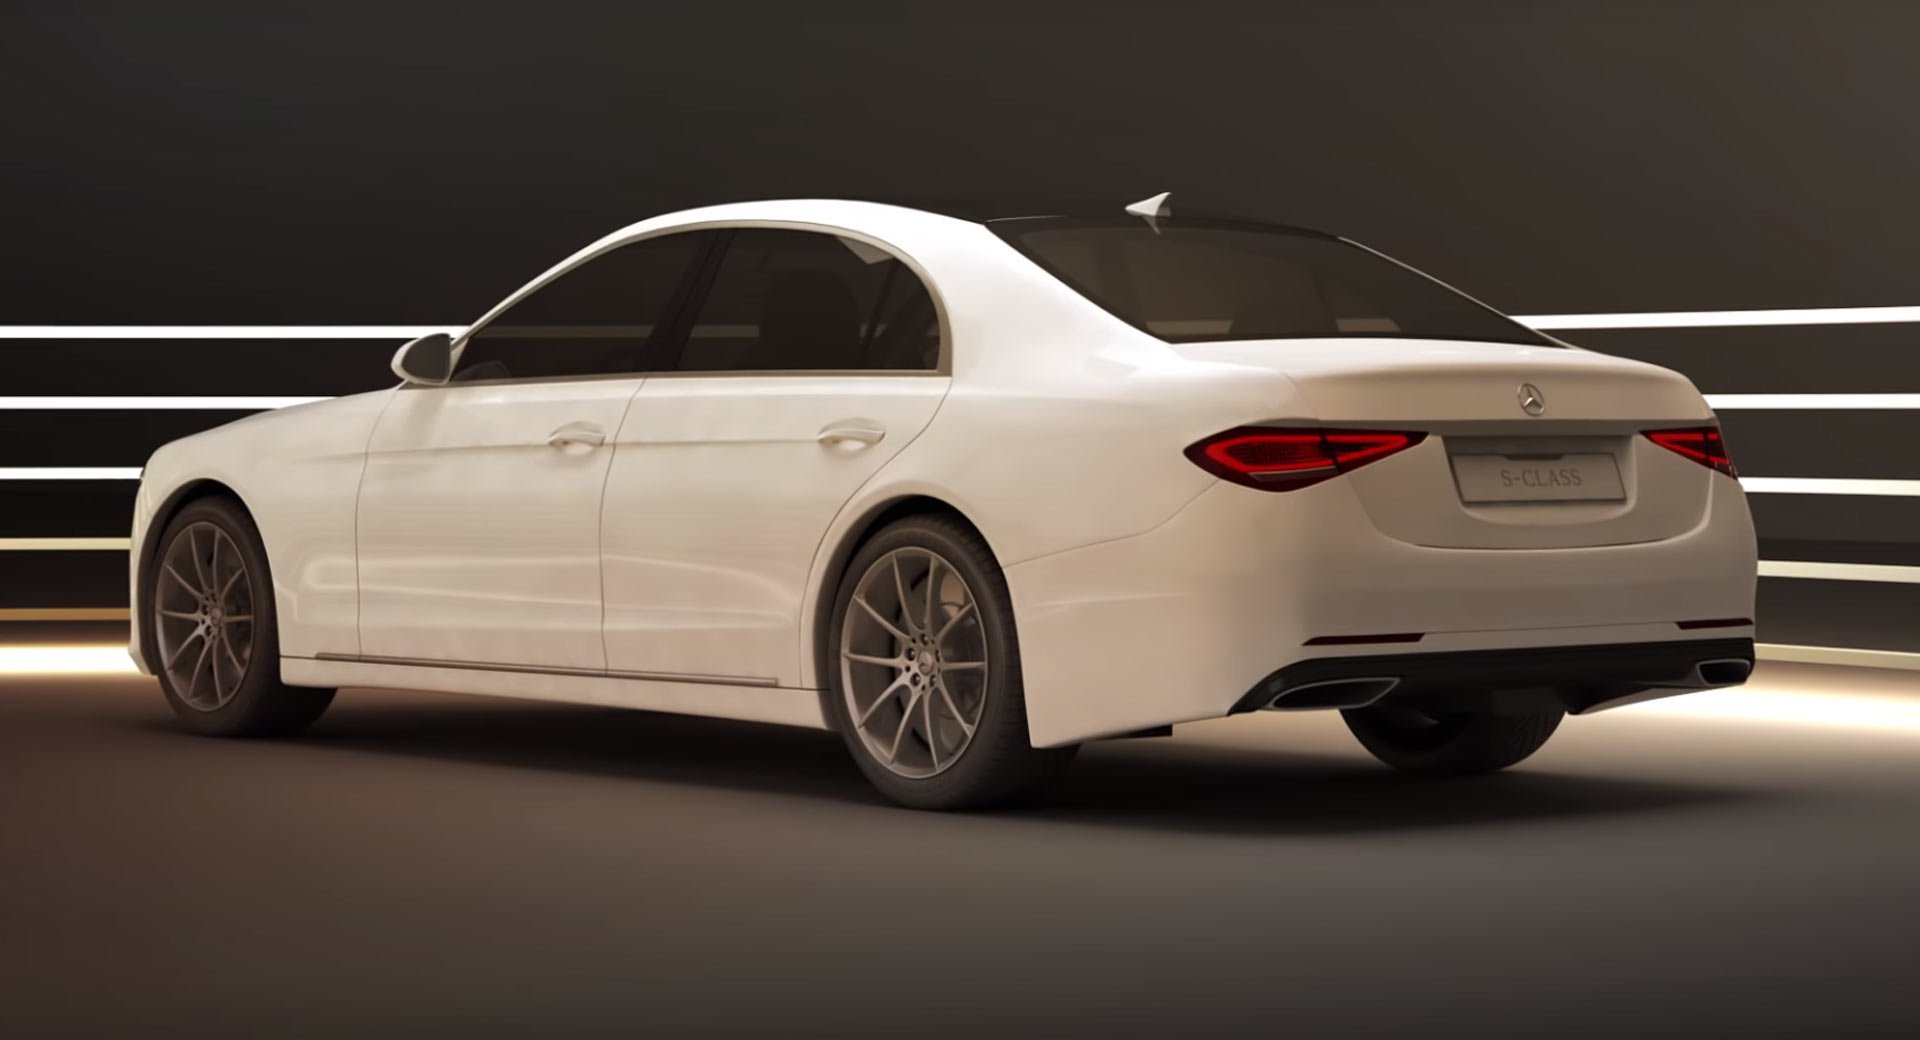 This Is How The 2020 Mercedes-Benz S-Class May Look Like